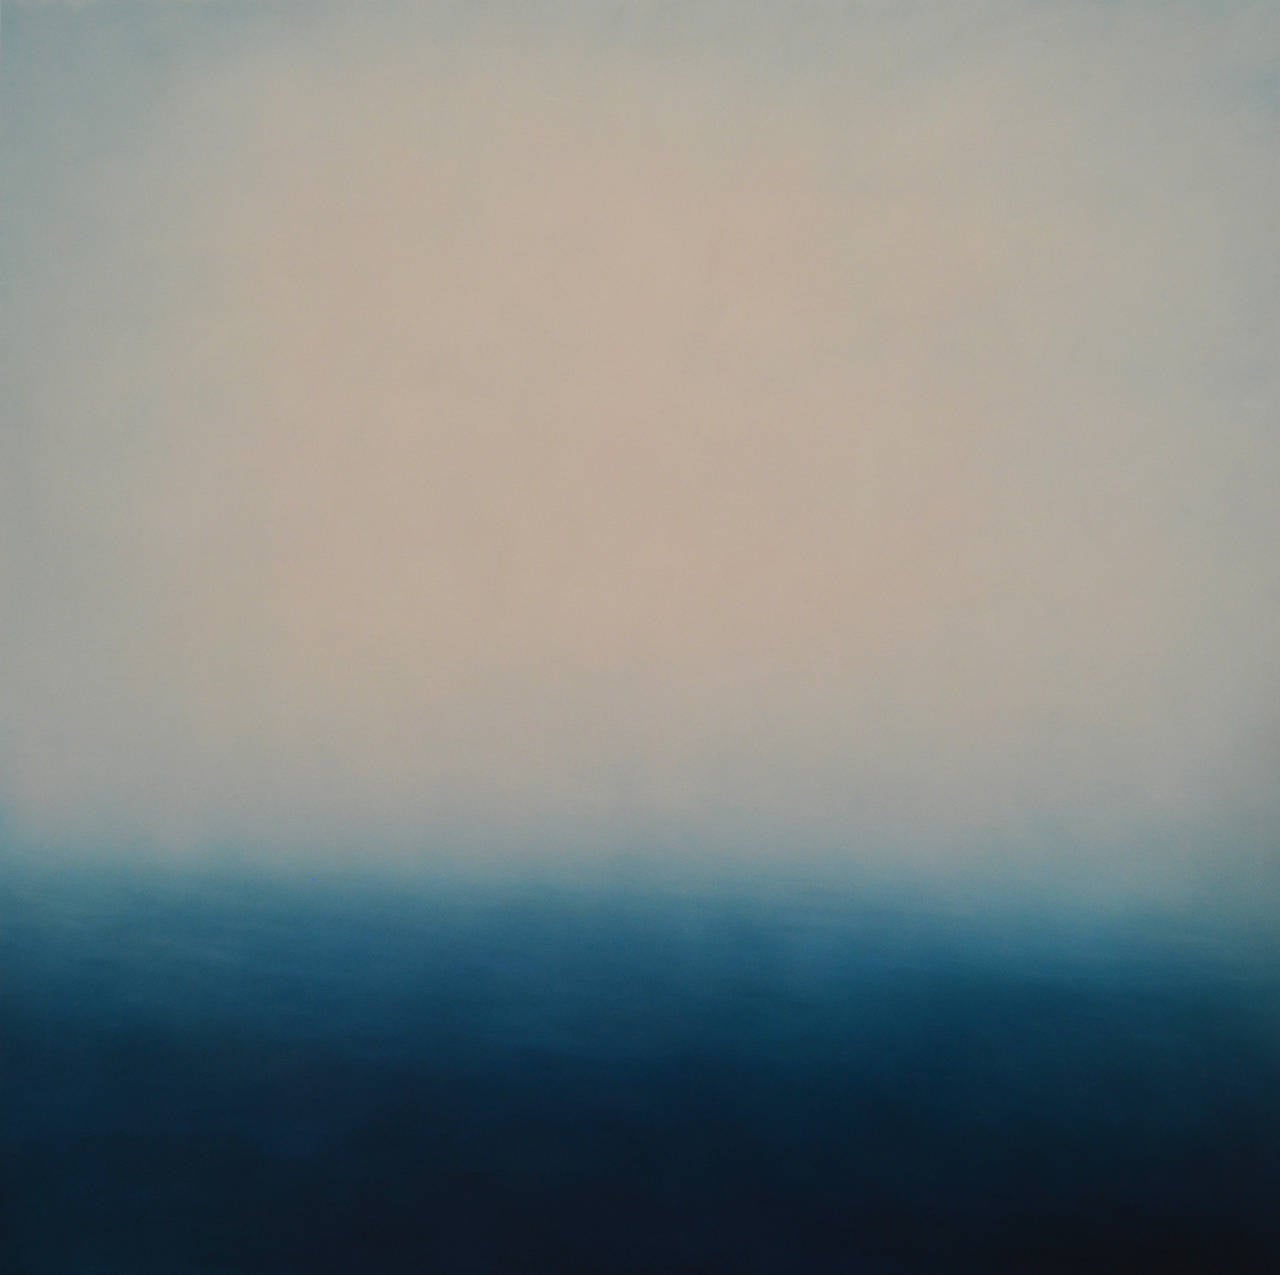 Oil on Panel 
60 x 60 inches
Signed and dated on verso